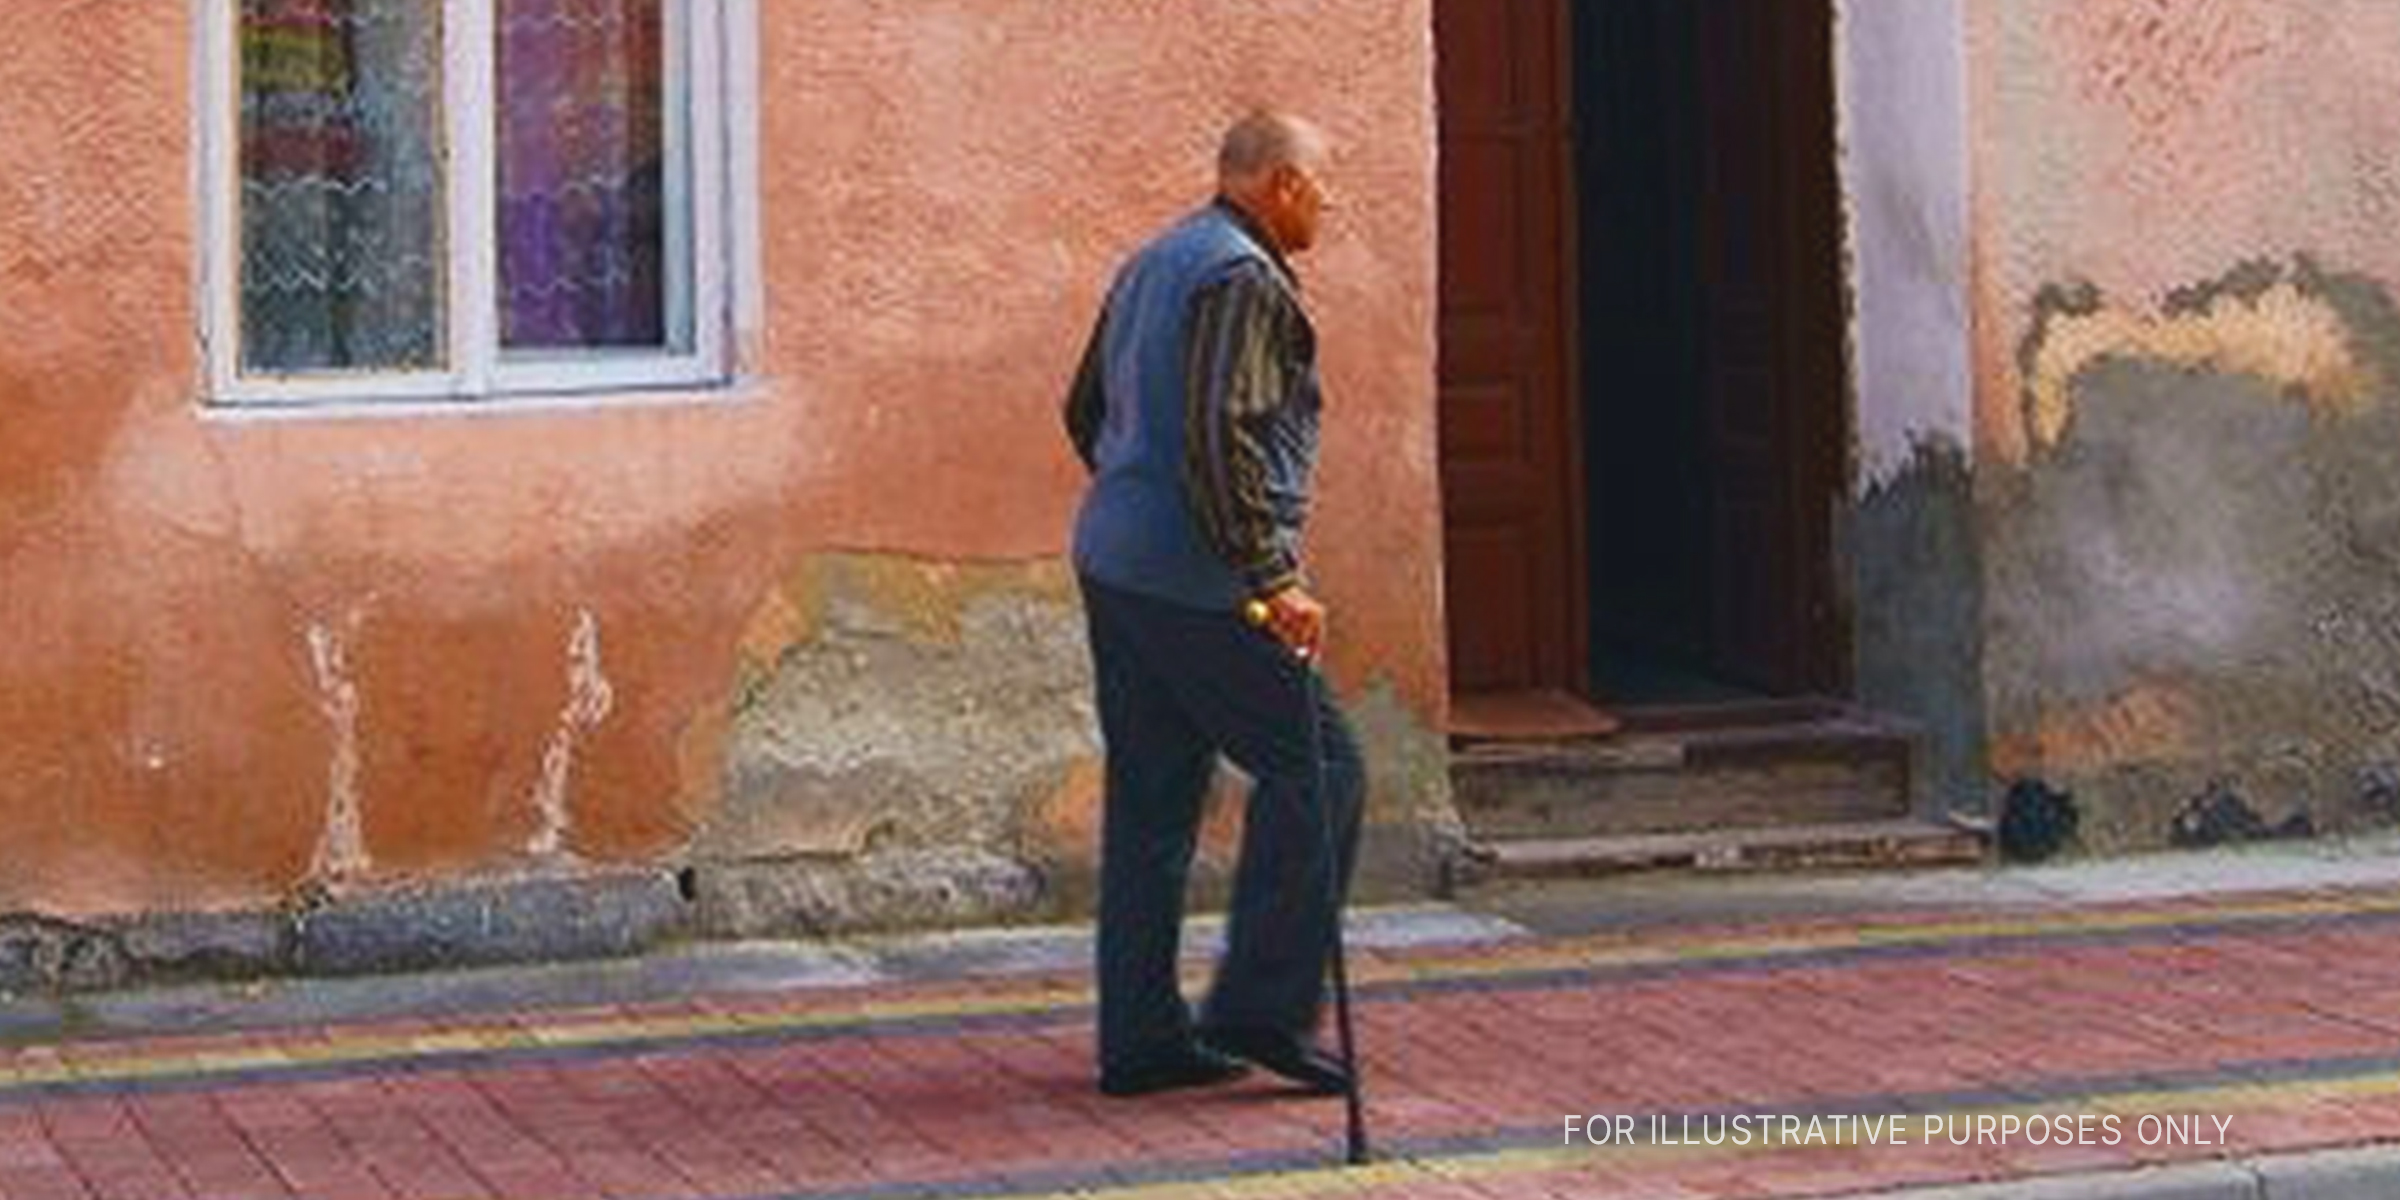 Old man walking in front of house. | Source: Flickr/Isabel Sommerfeld (CC BY 2.0)